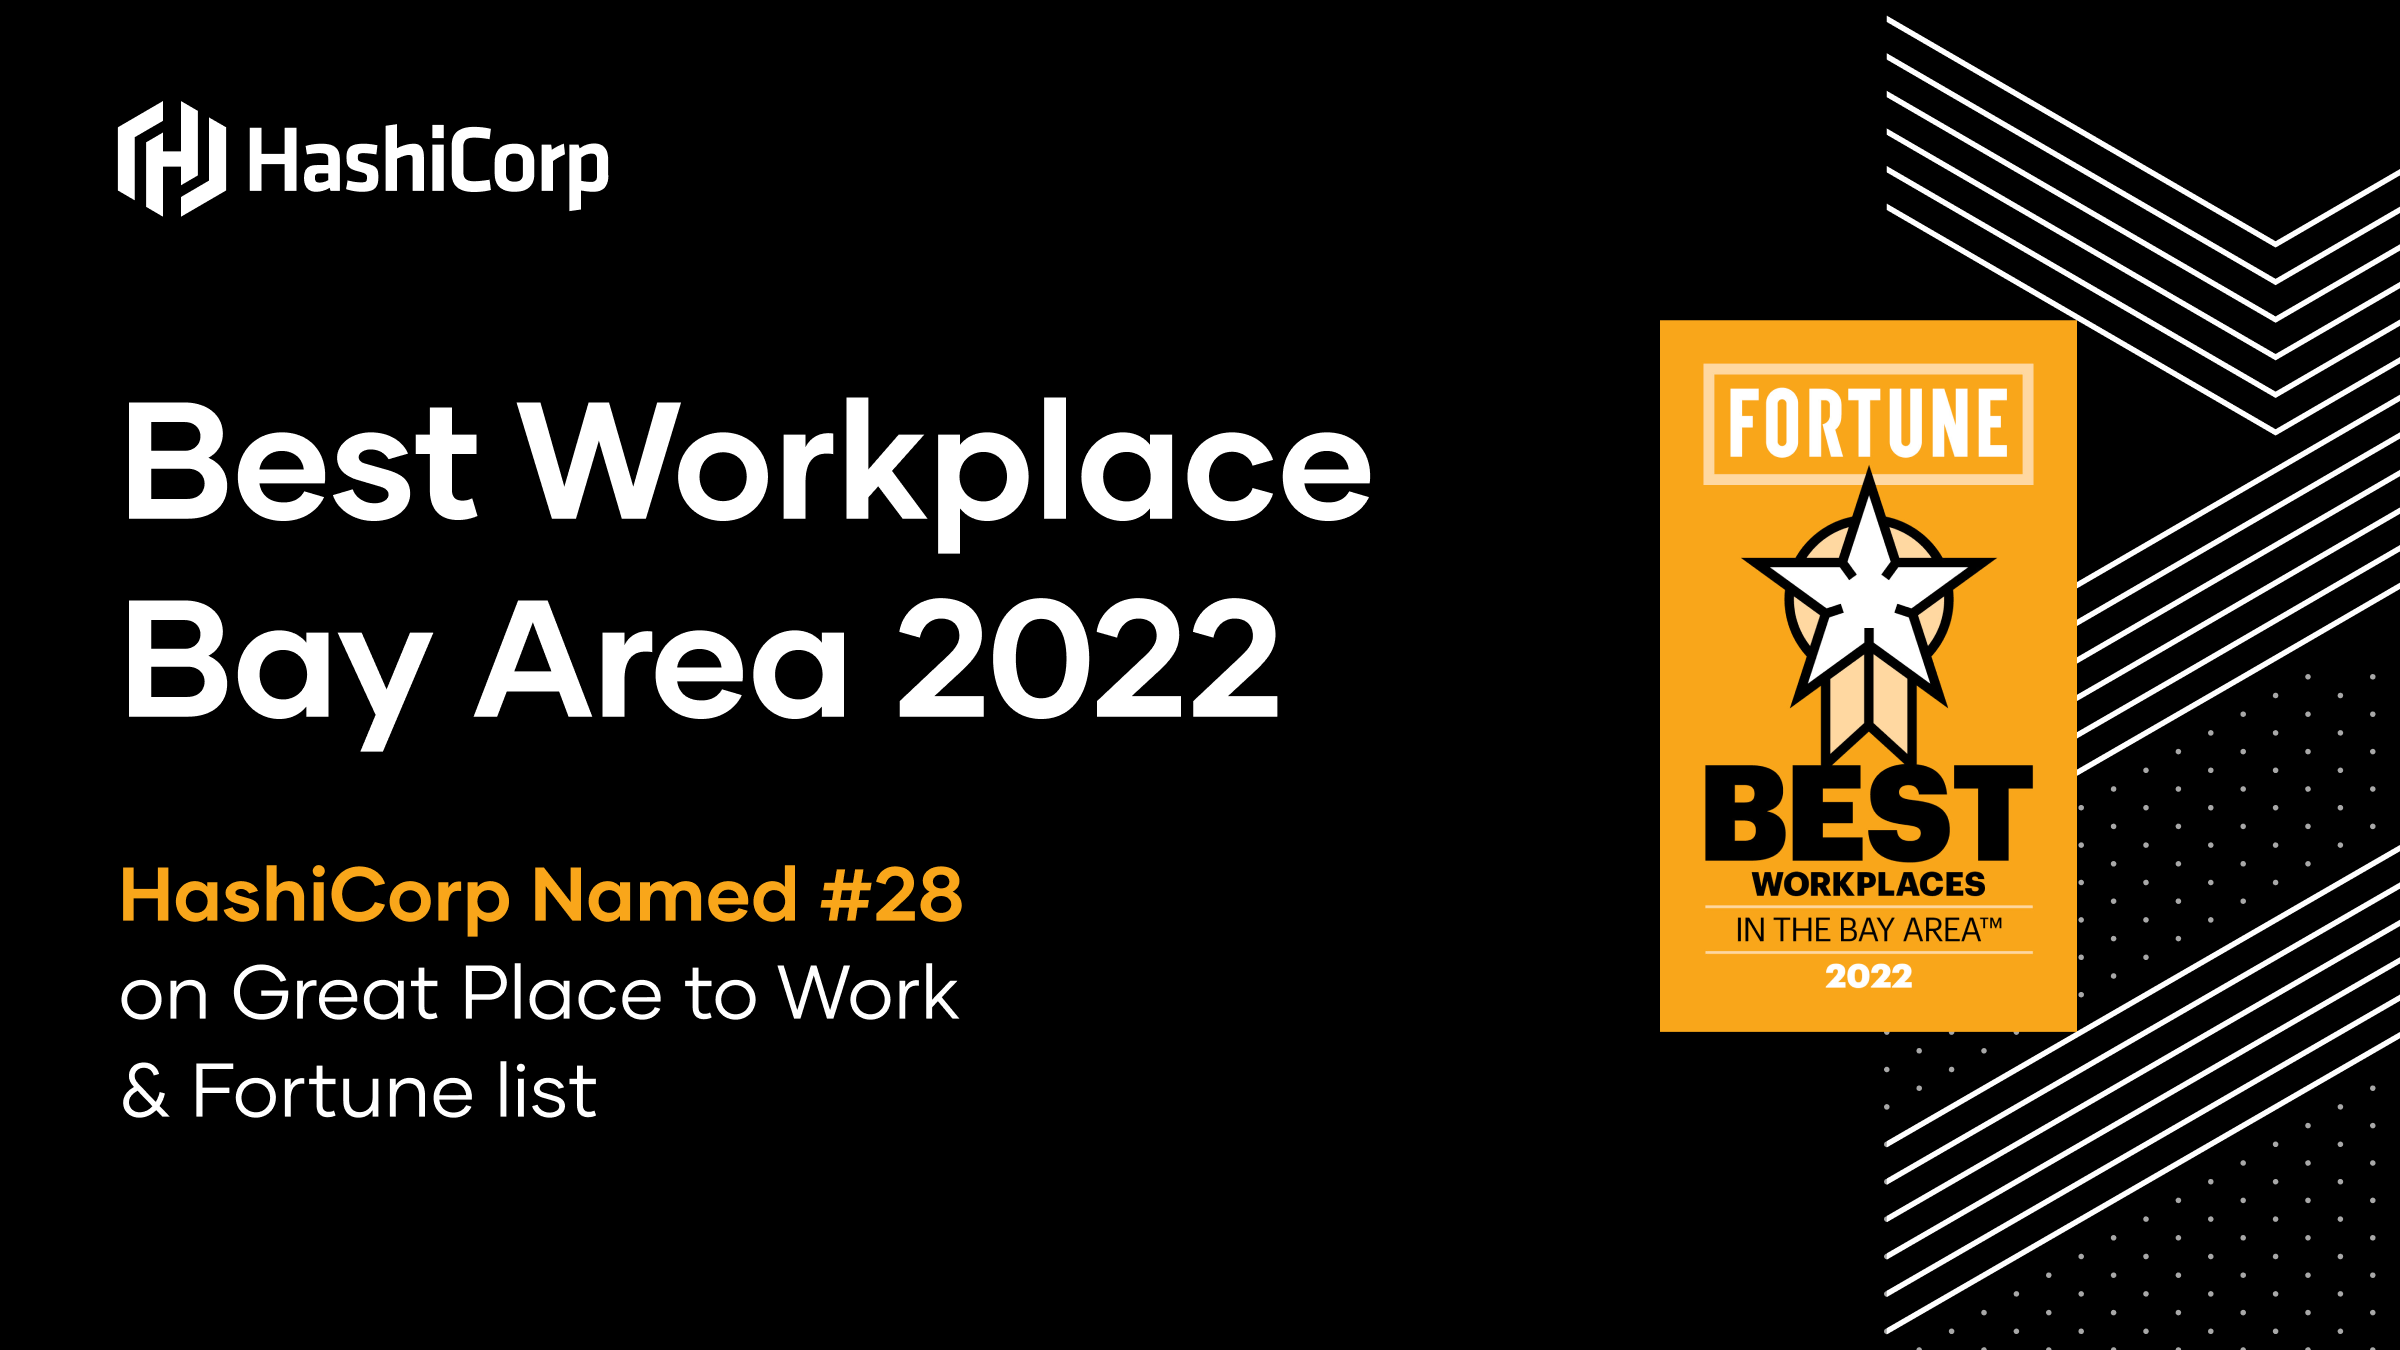 ​​HashiCorp Recognized as a Best Workplace in the Bay Area